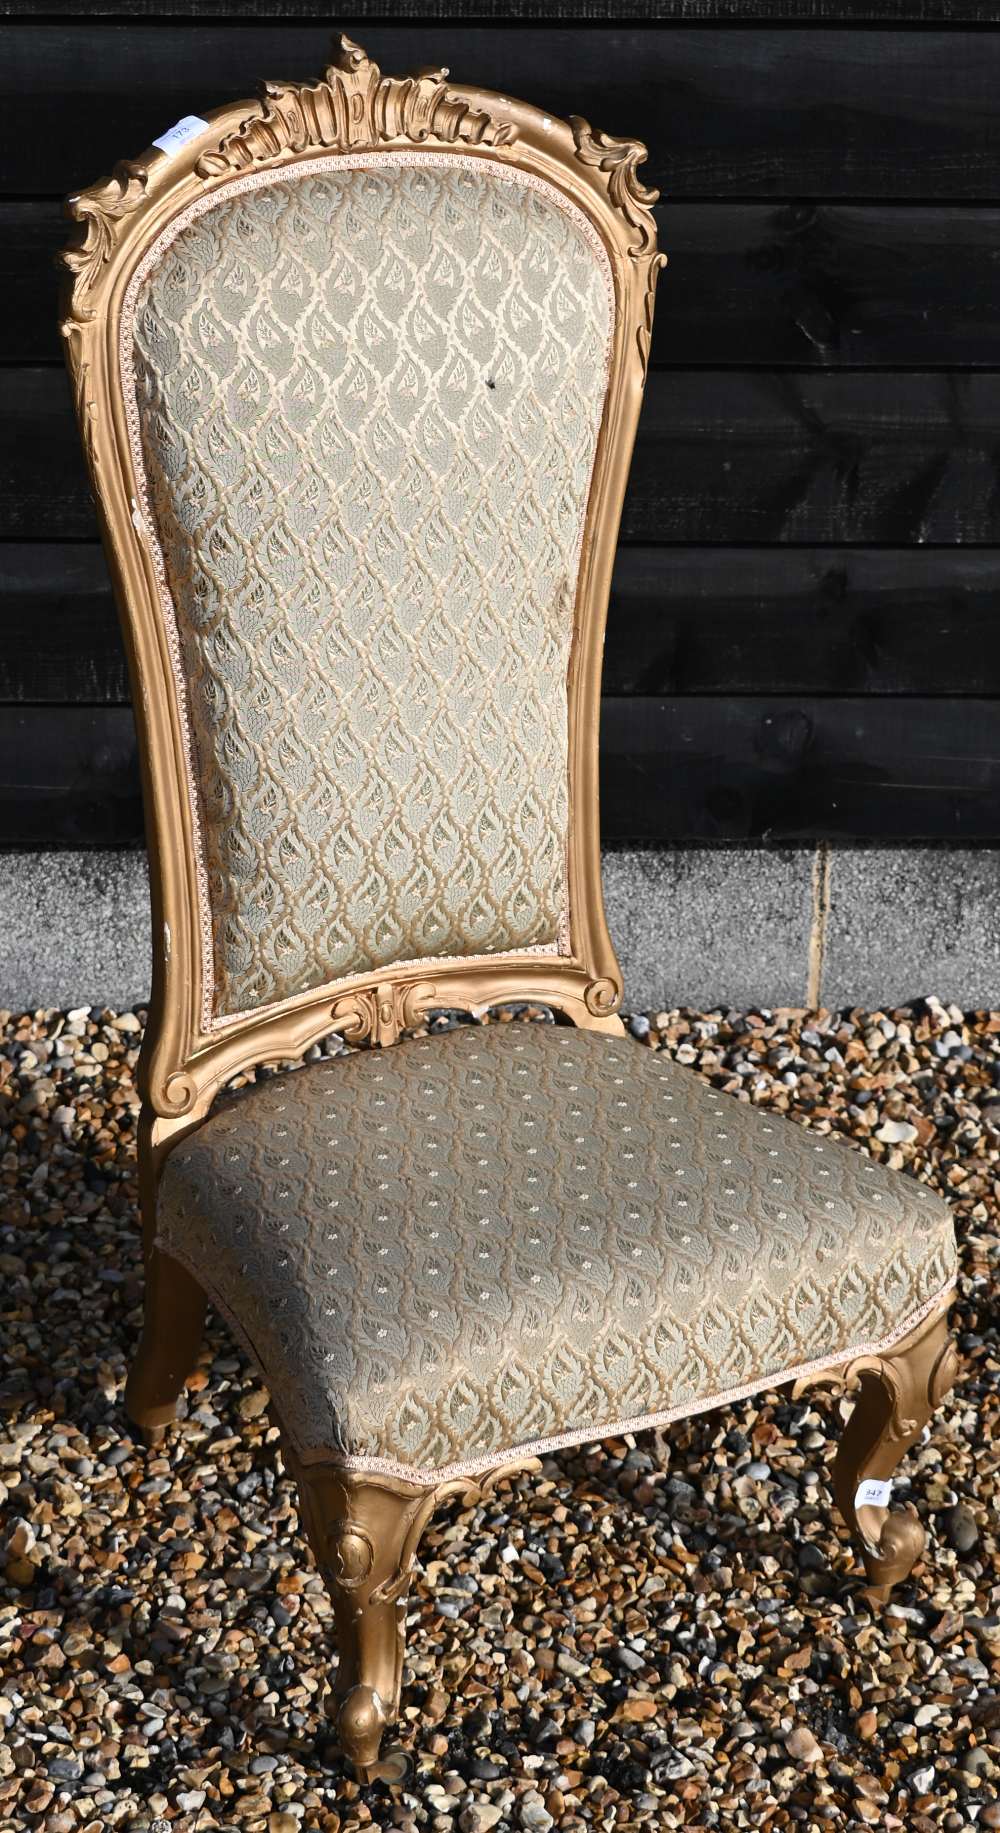 A Continental gilt framed nursing chair with repeating leaf pattern brocade upholstery